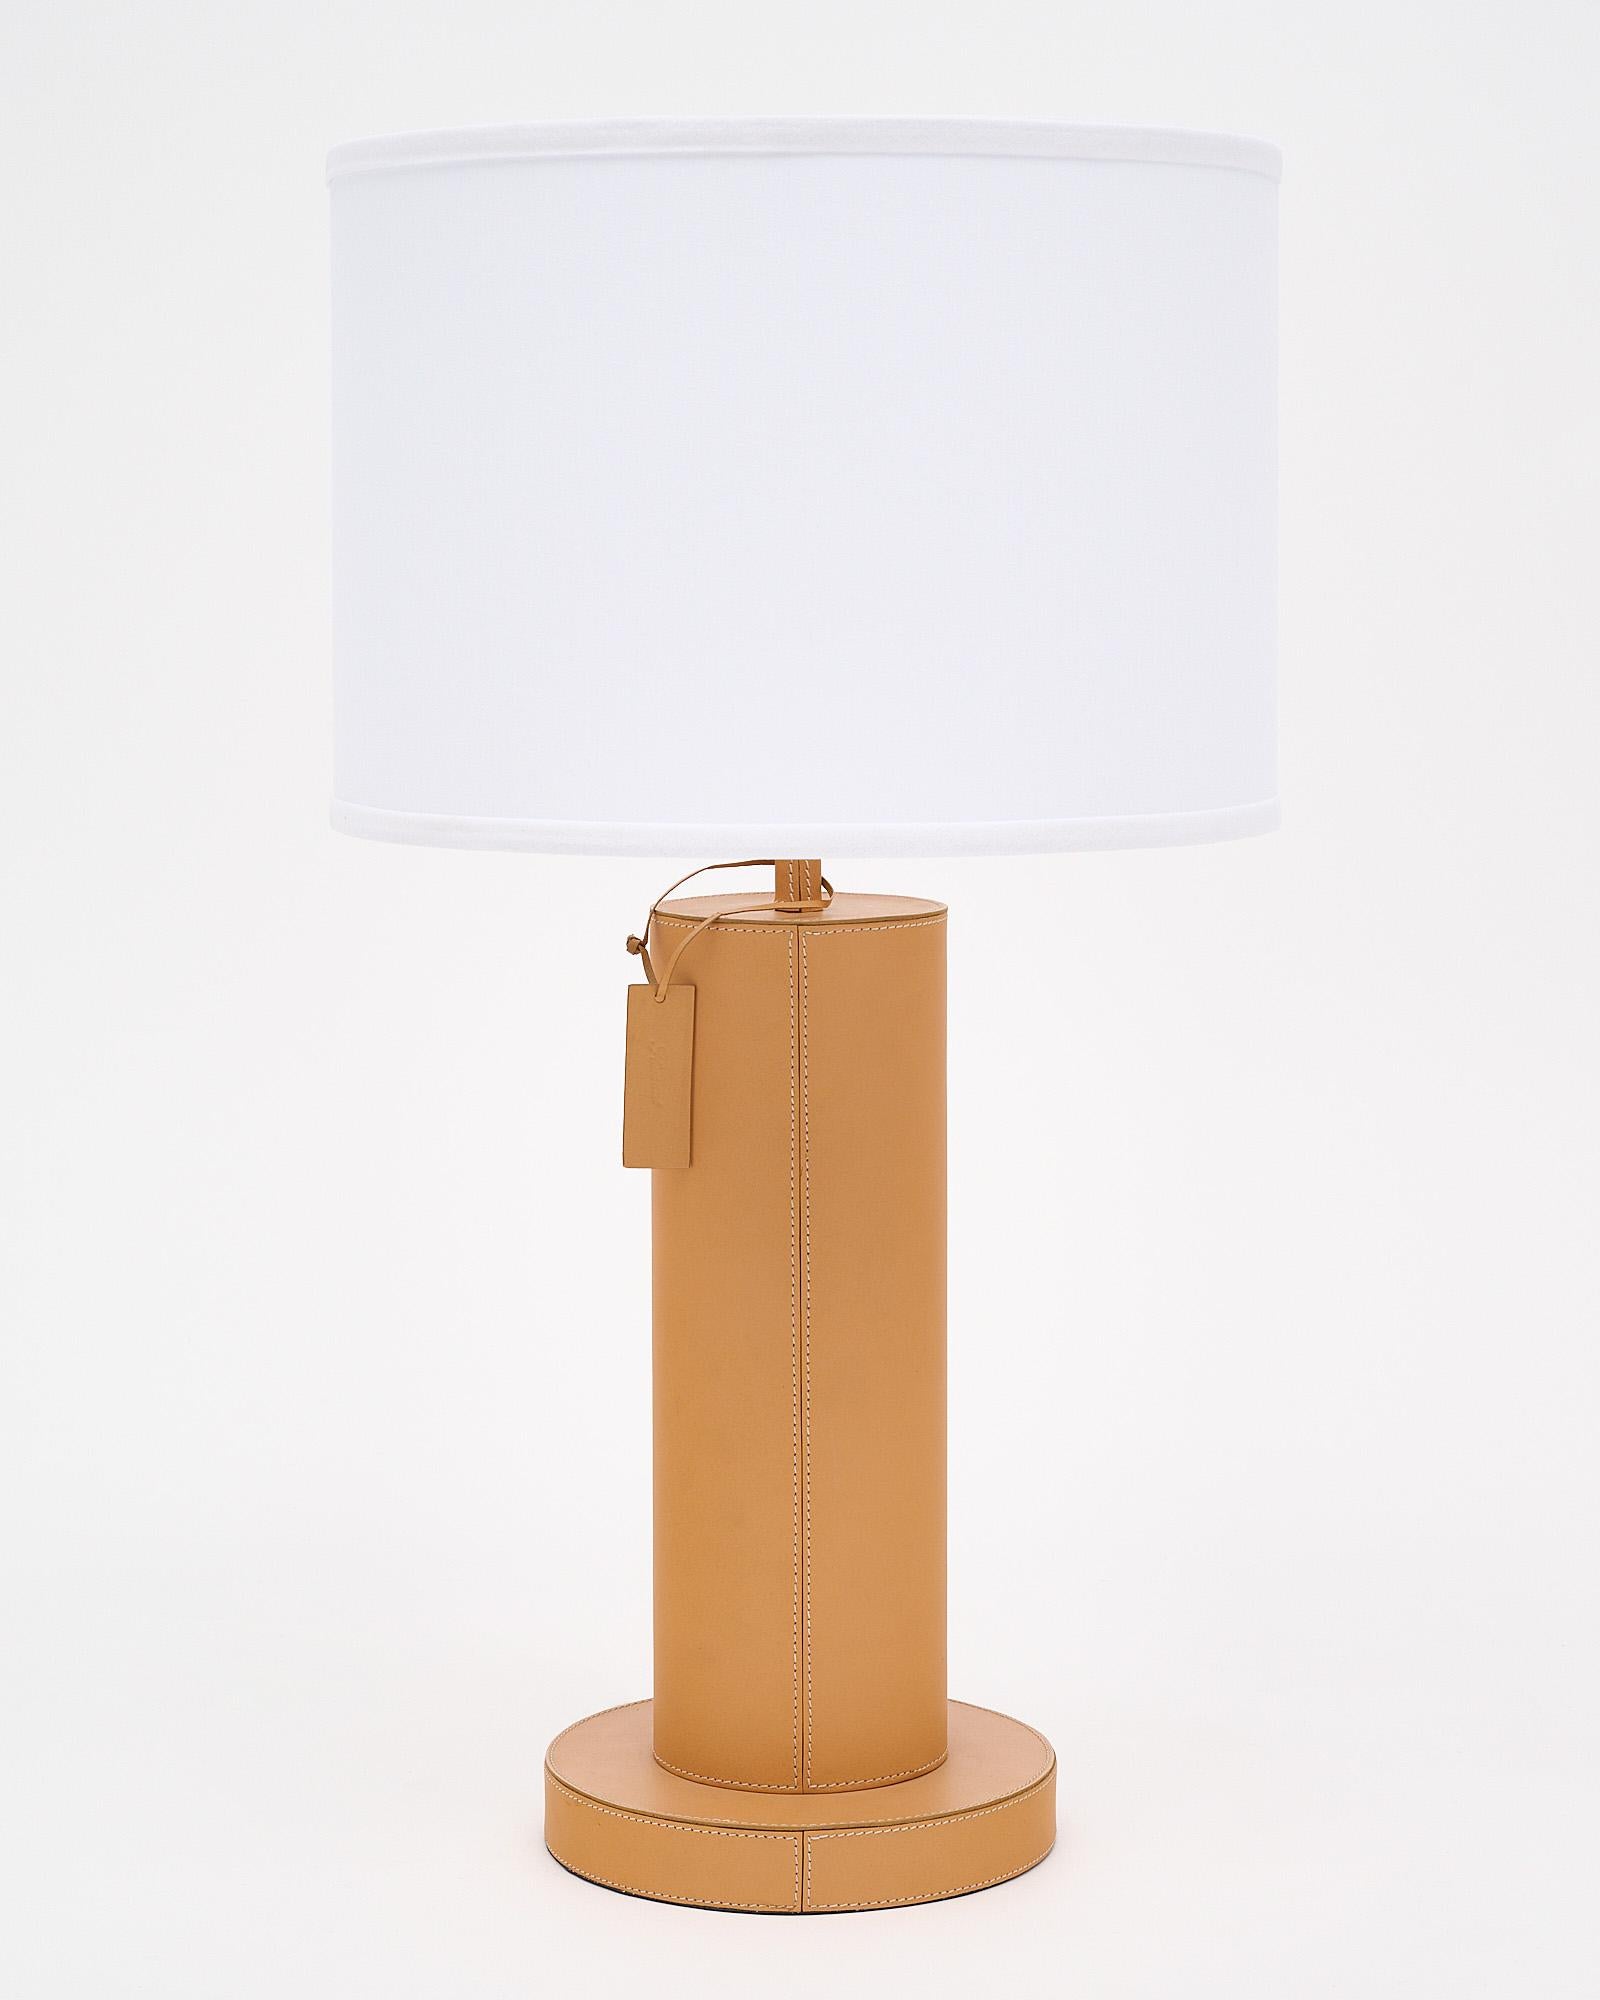 Pair of table lamps wrapped in tan leather and featuring contrasting stitching. They are tagged with a leather stamp saying Flamant. They have been newly wired to fit US standards.